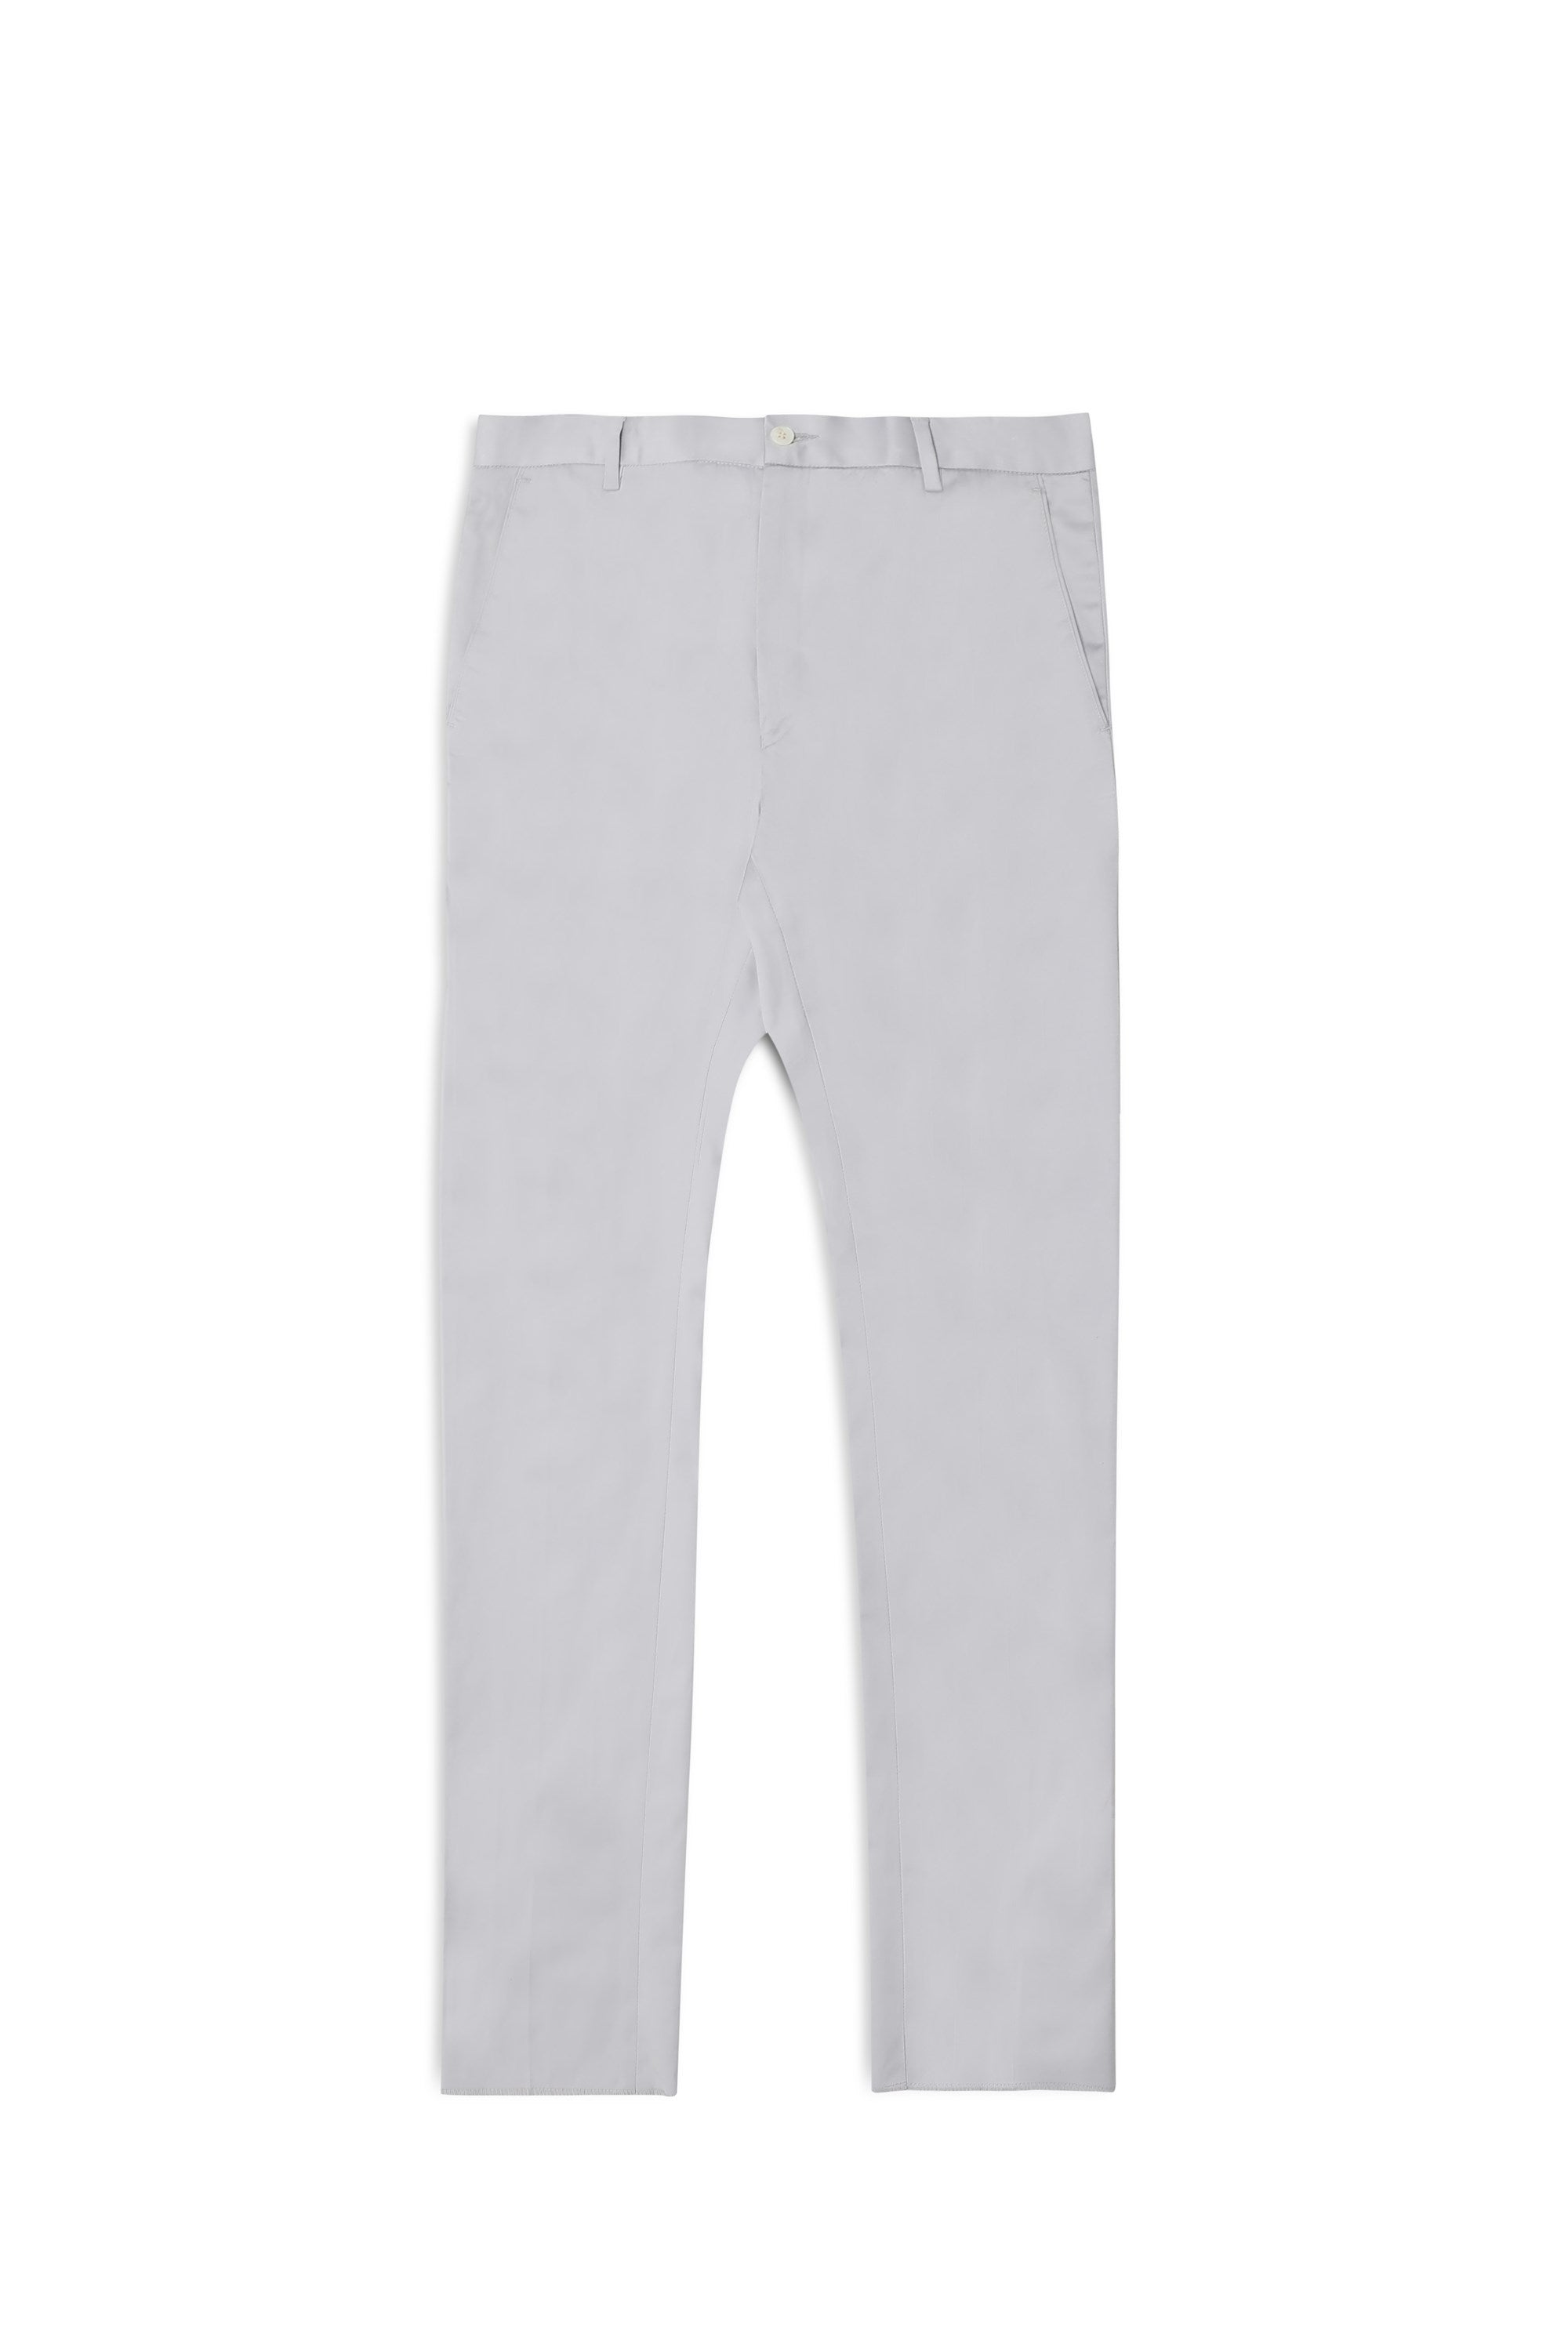 Bare Brown Stretch Slim Fit Cotton Trousers - Grey